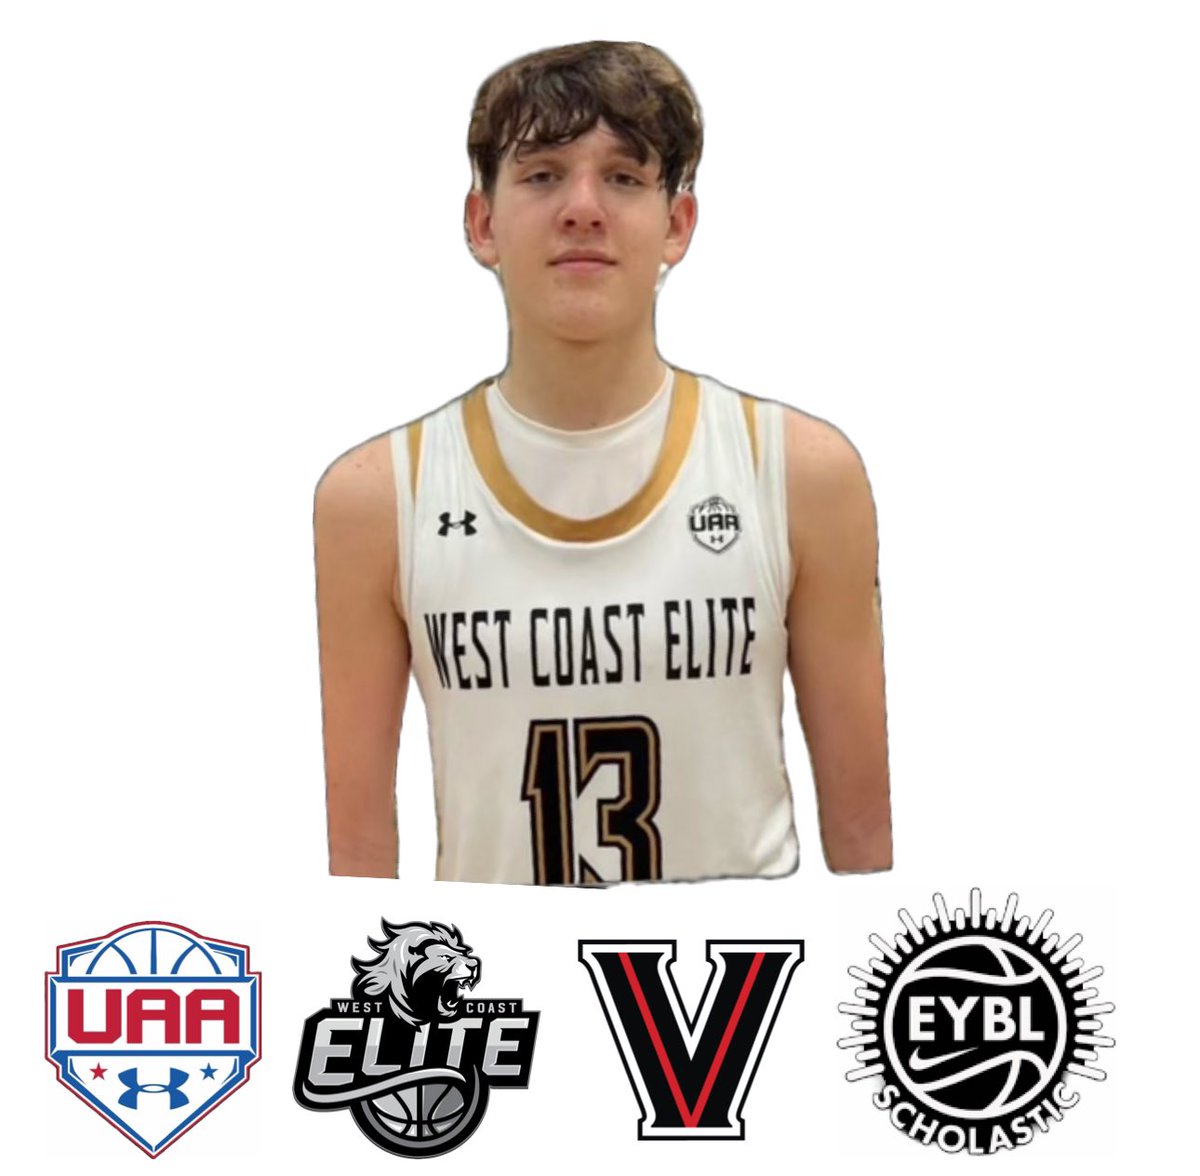 Emilis Zibuda, a 6’6” prospect from the 2027 class, averaged 14.5 points and 5.75 rebounds per game during the first session of the Under Armour Association (UAA) in South Carolina. He is playing up a level in the 16U division for West Coast Elite. Emilis also attends Veritas,…